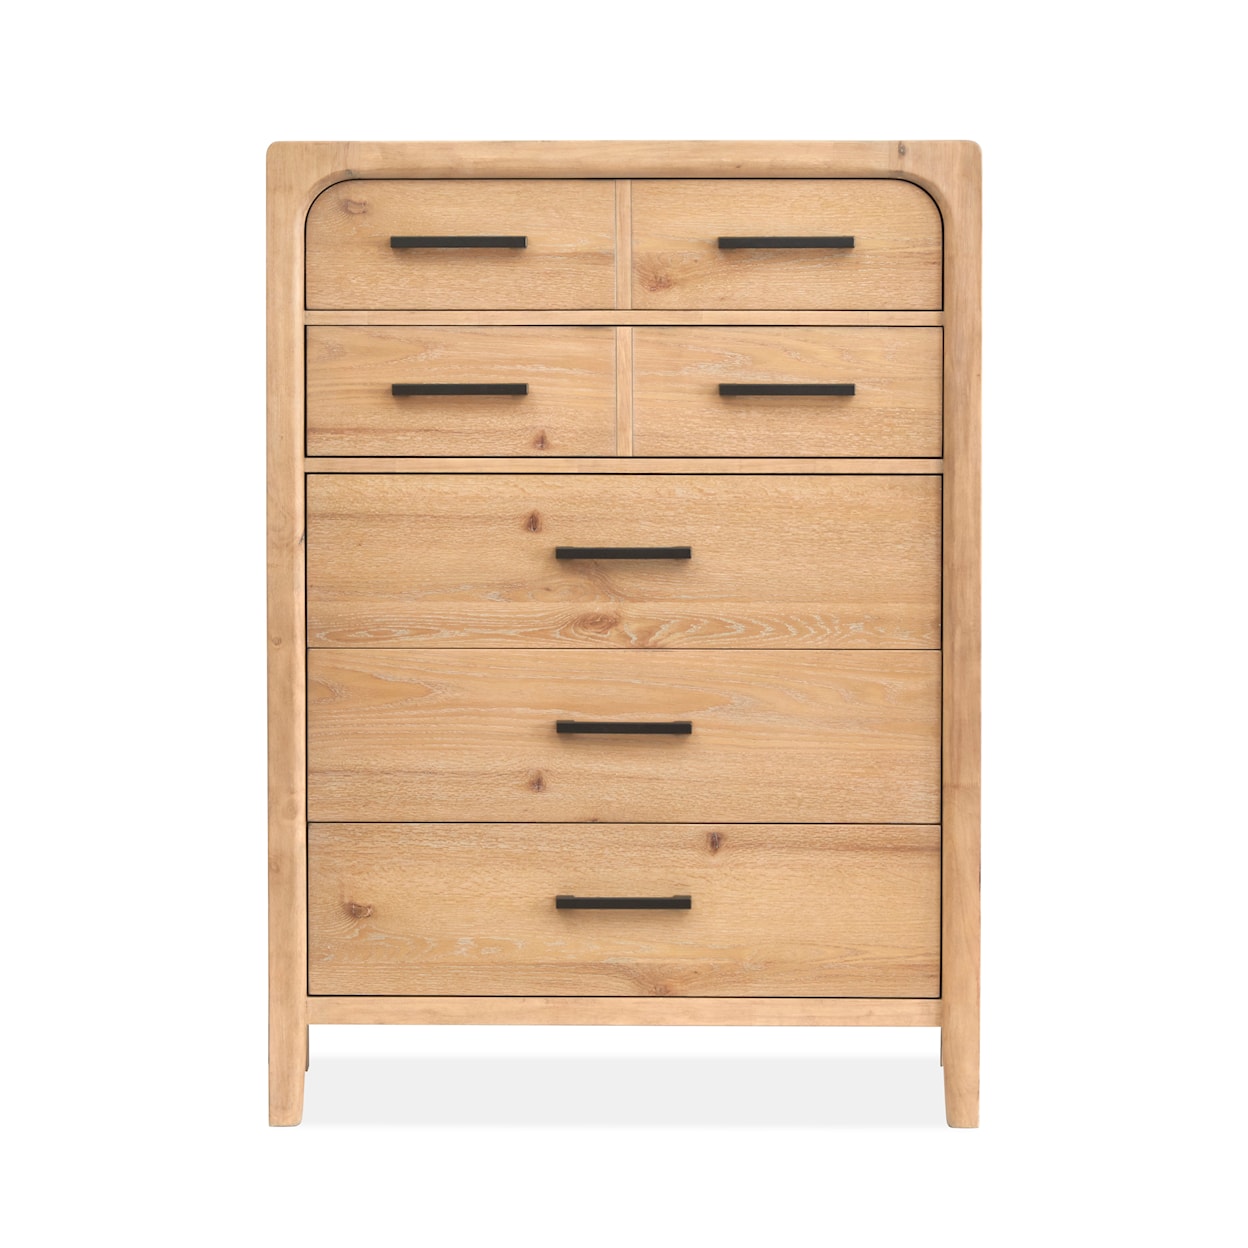 Magnussen Home Somerset Bedroom Chest of Drawers